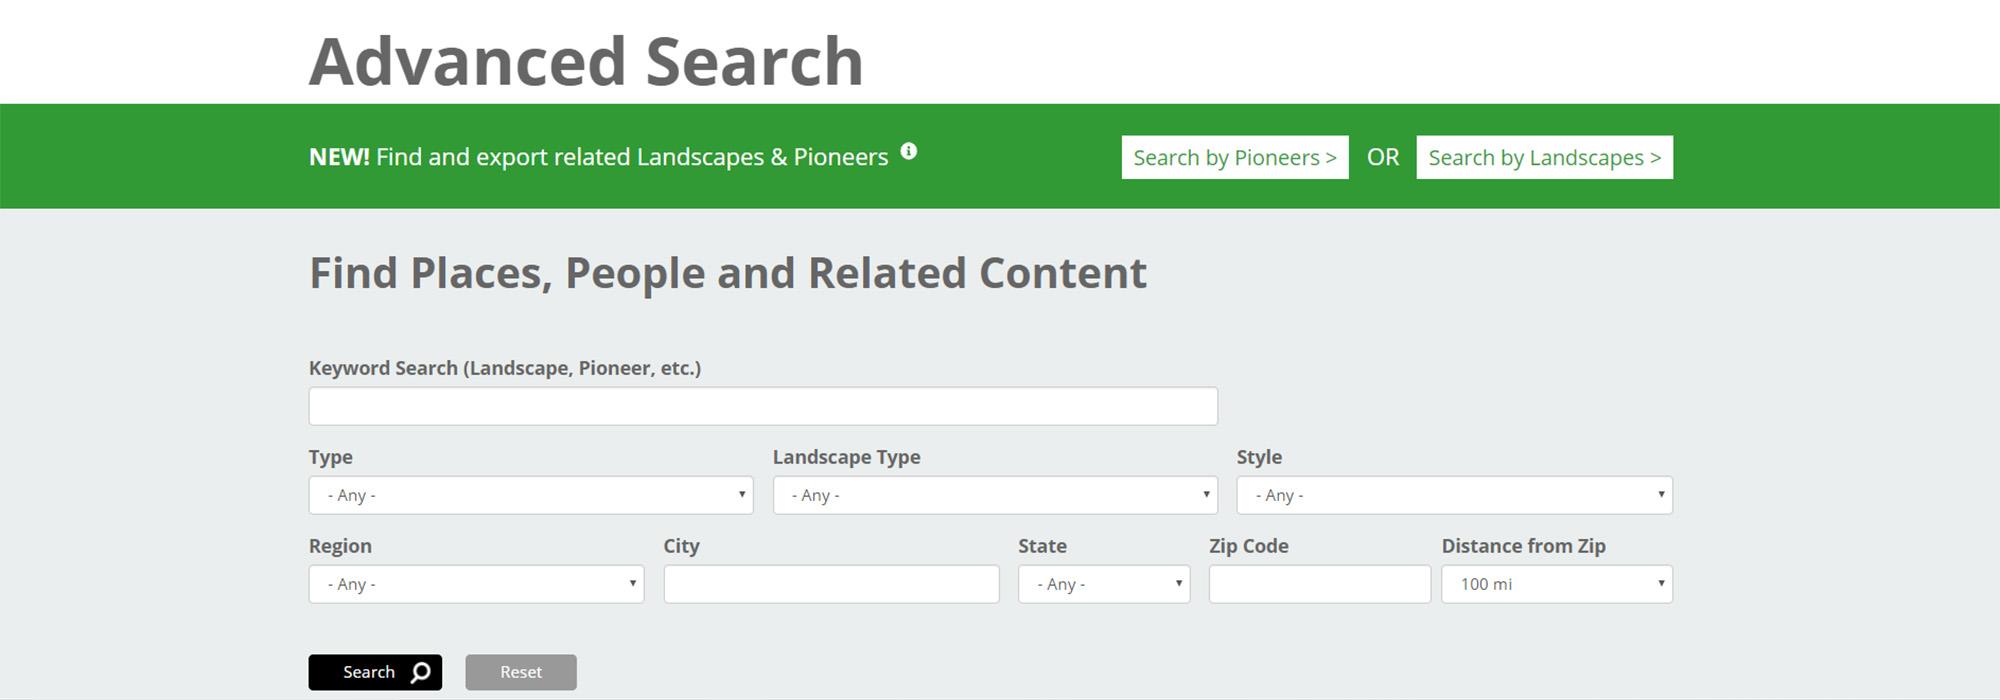 New Advanced Search for Landscapes and Pioneers